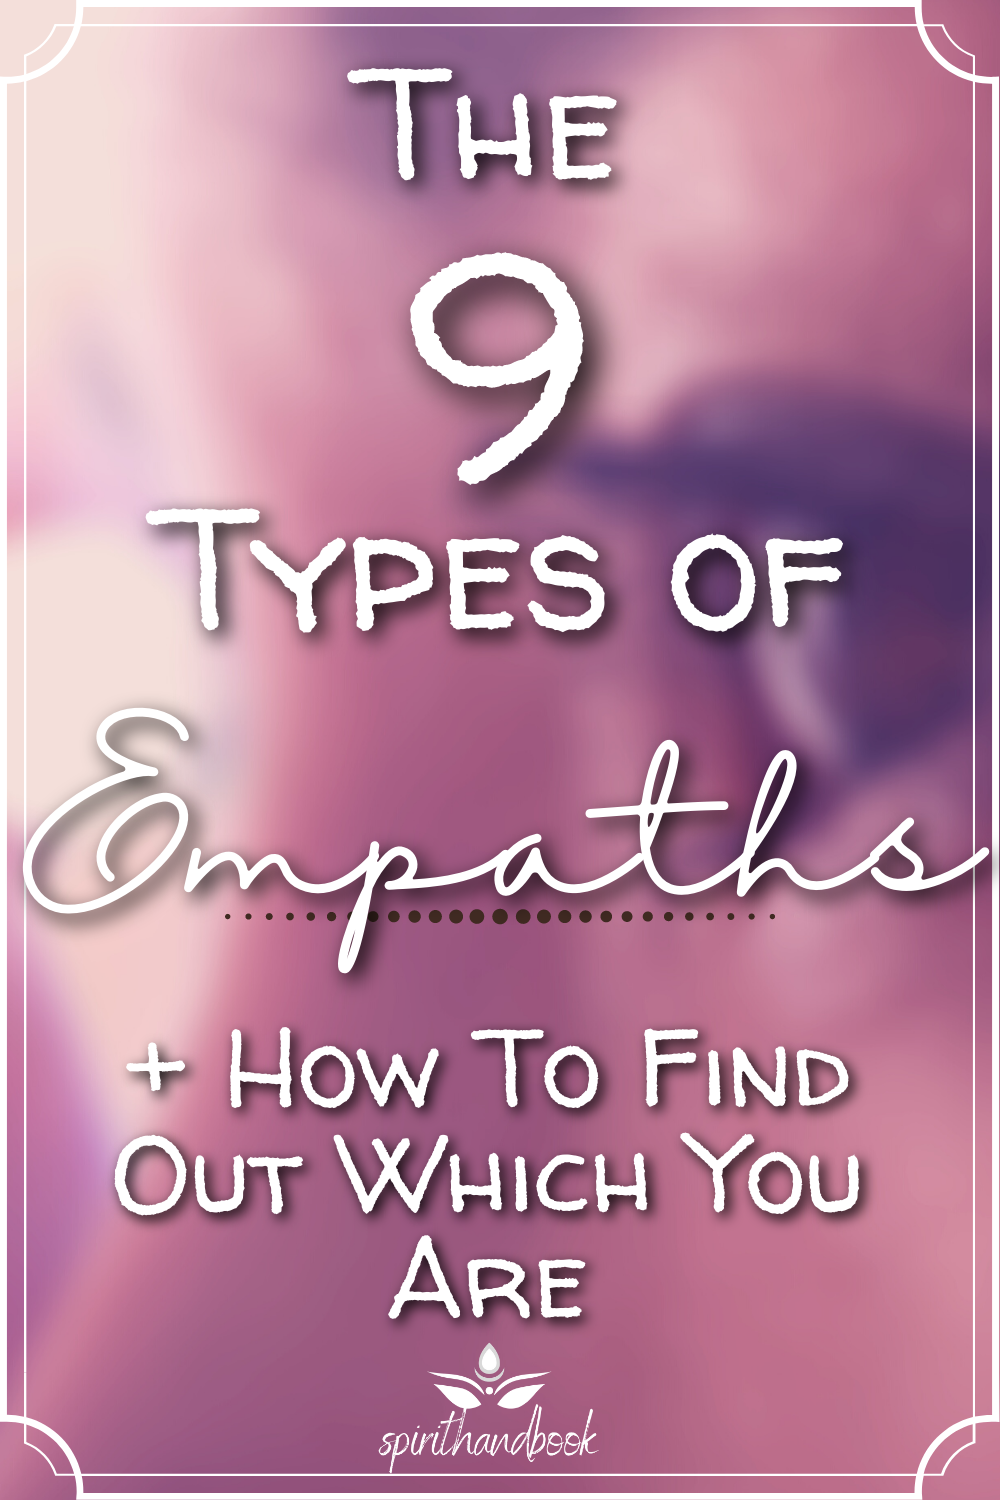 9 Types Of Empaths + How To Find Out Which You Are